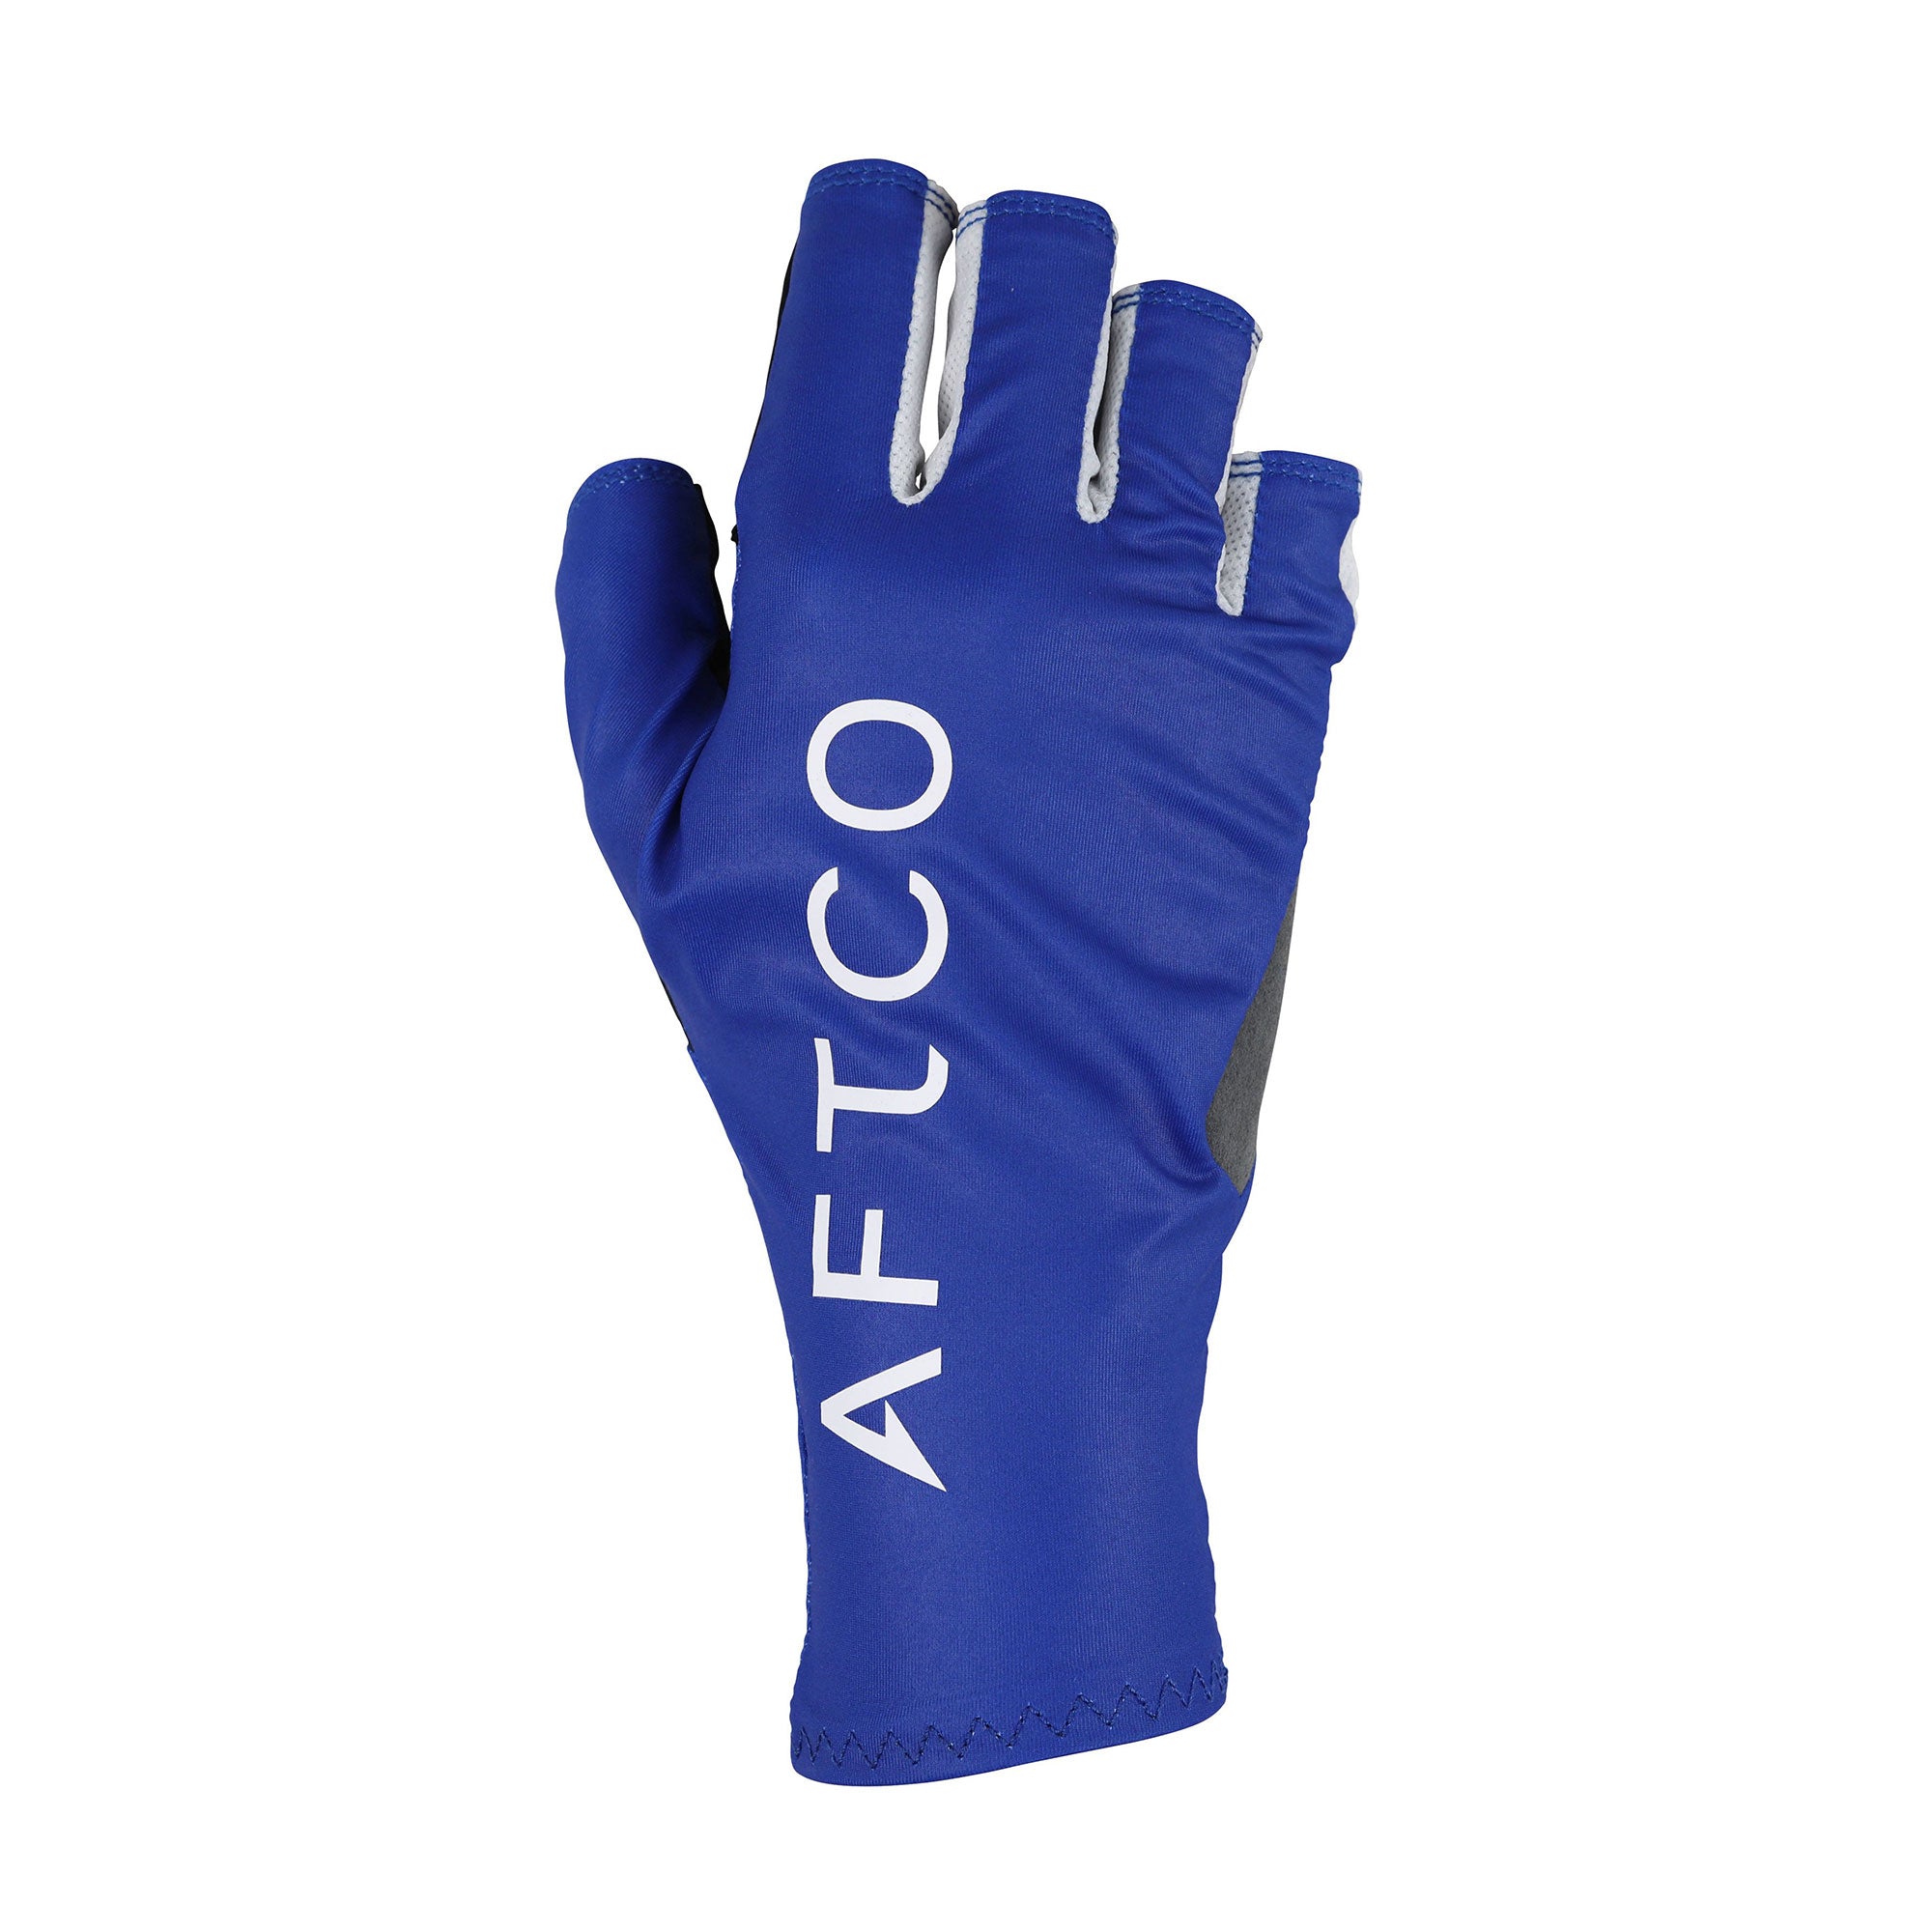 AFTCO Solpro Gloves - Blue - Large